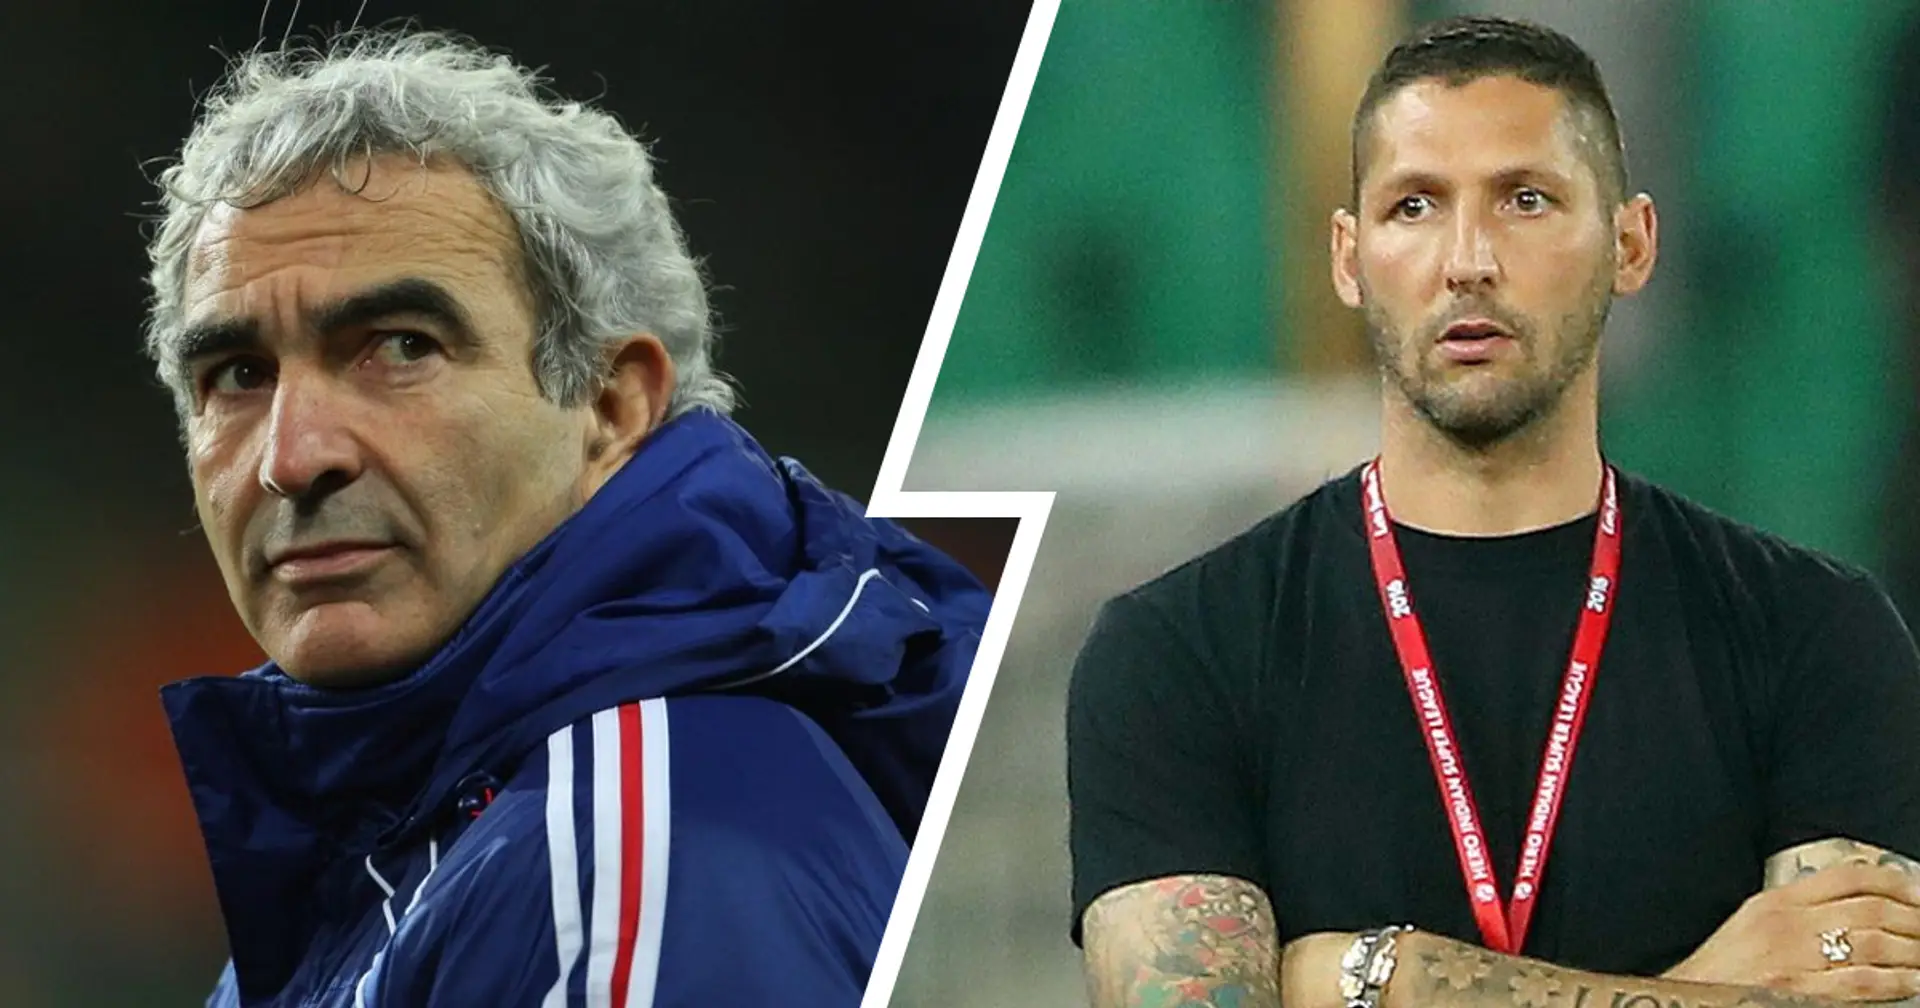 Former France boss Domenech rips into Atalanta head coach – and gets brutally roasted by Marco Materazzi